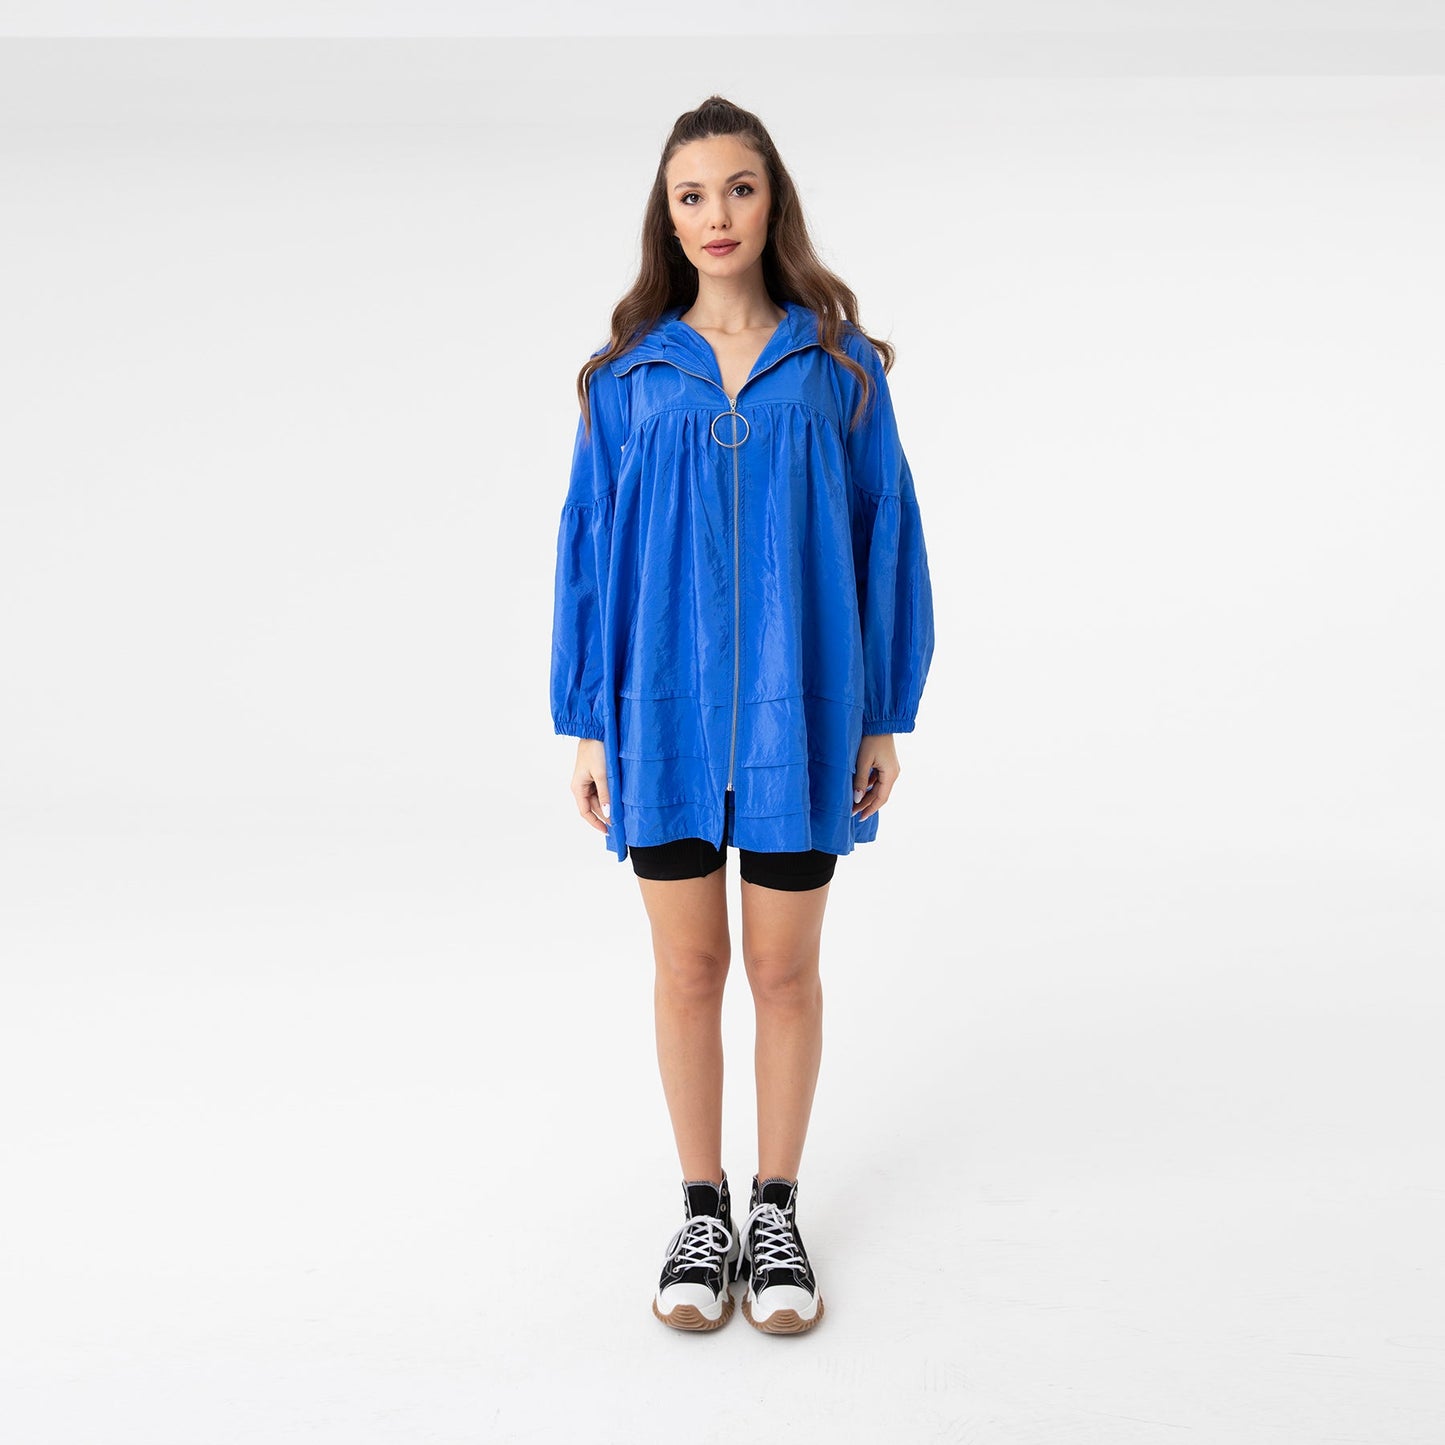 Load image into Gallery viewer, Royal Blue Zip Up Windbreaker Jacket - One Size
